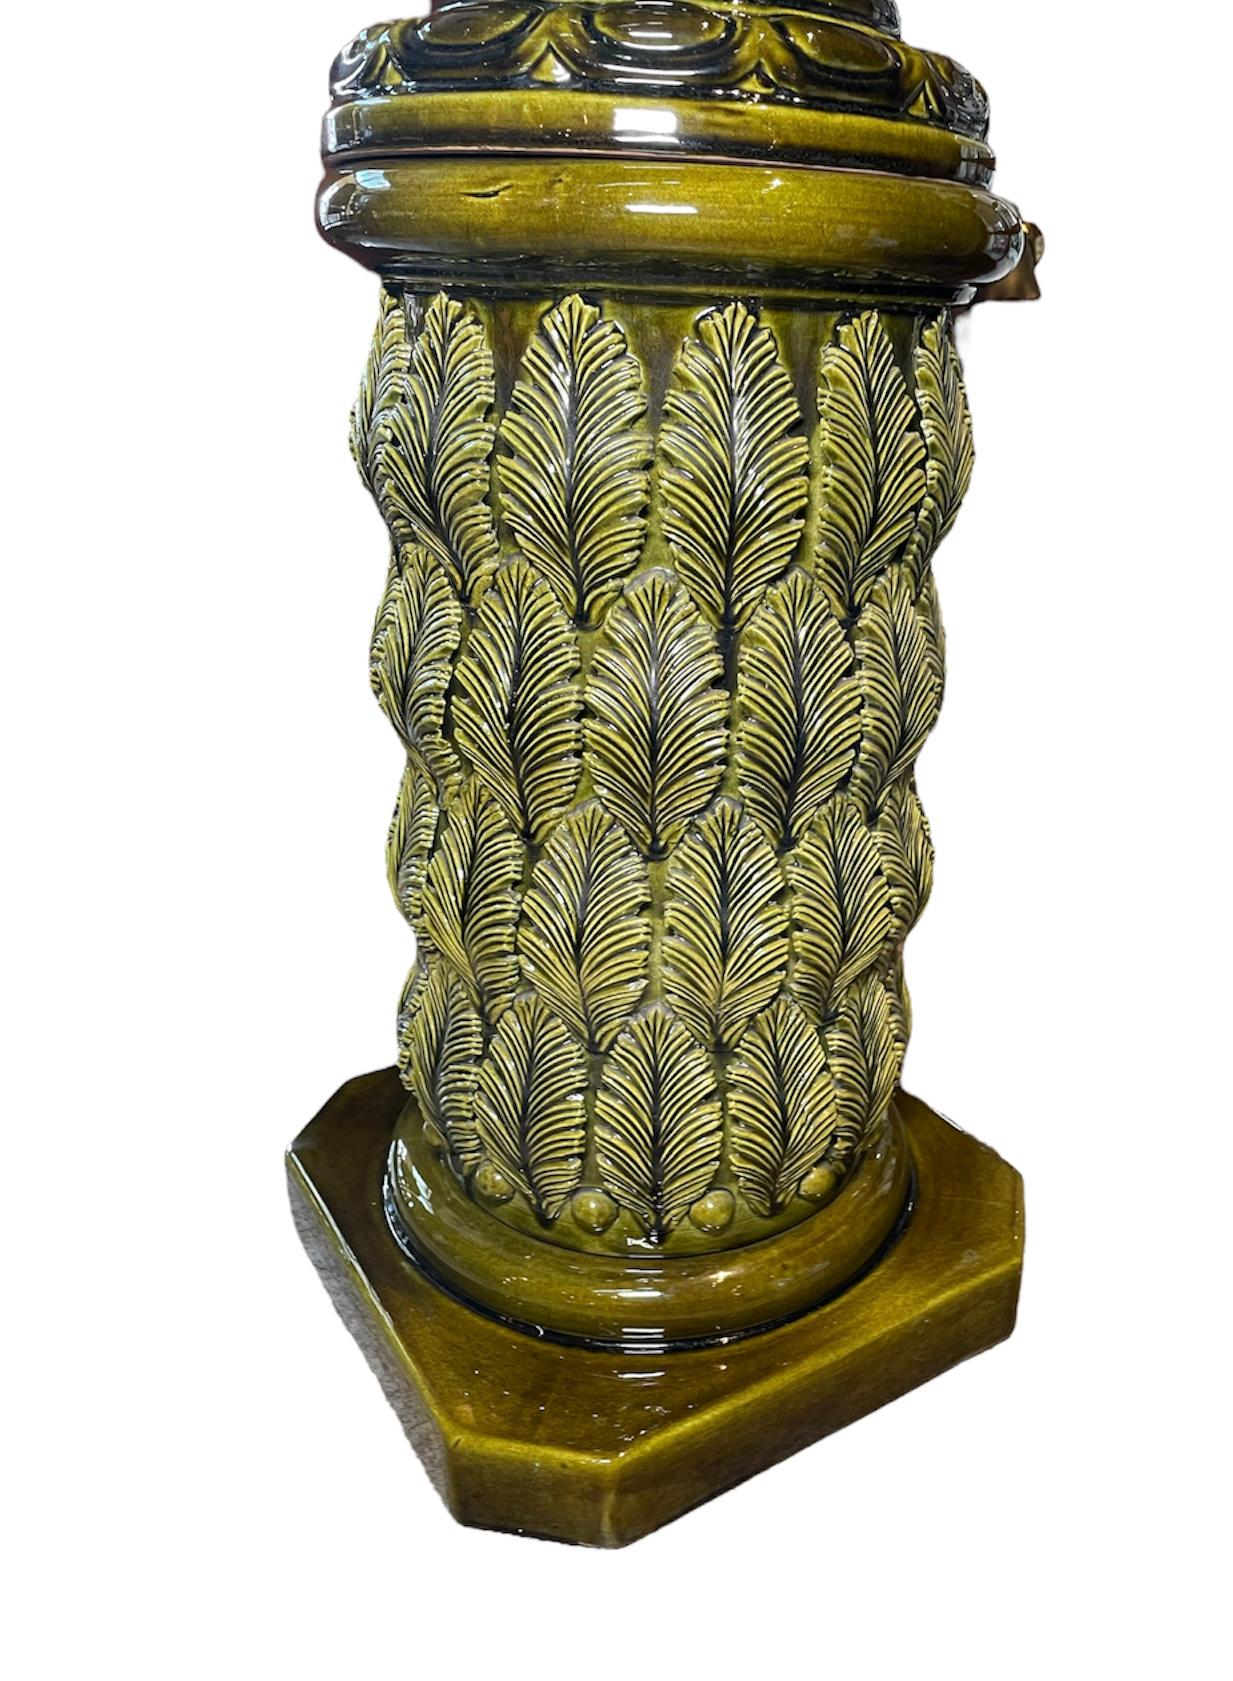 This is an olive green color set of large Spaniard Cerámicas Bondia Jardiniere and pedestal. The Jardiniere is decorated with a relief of Empire style swans with open feathers around a bell shaped upside down vase. The pedestal is cylindrical shaped